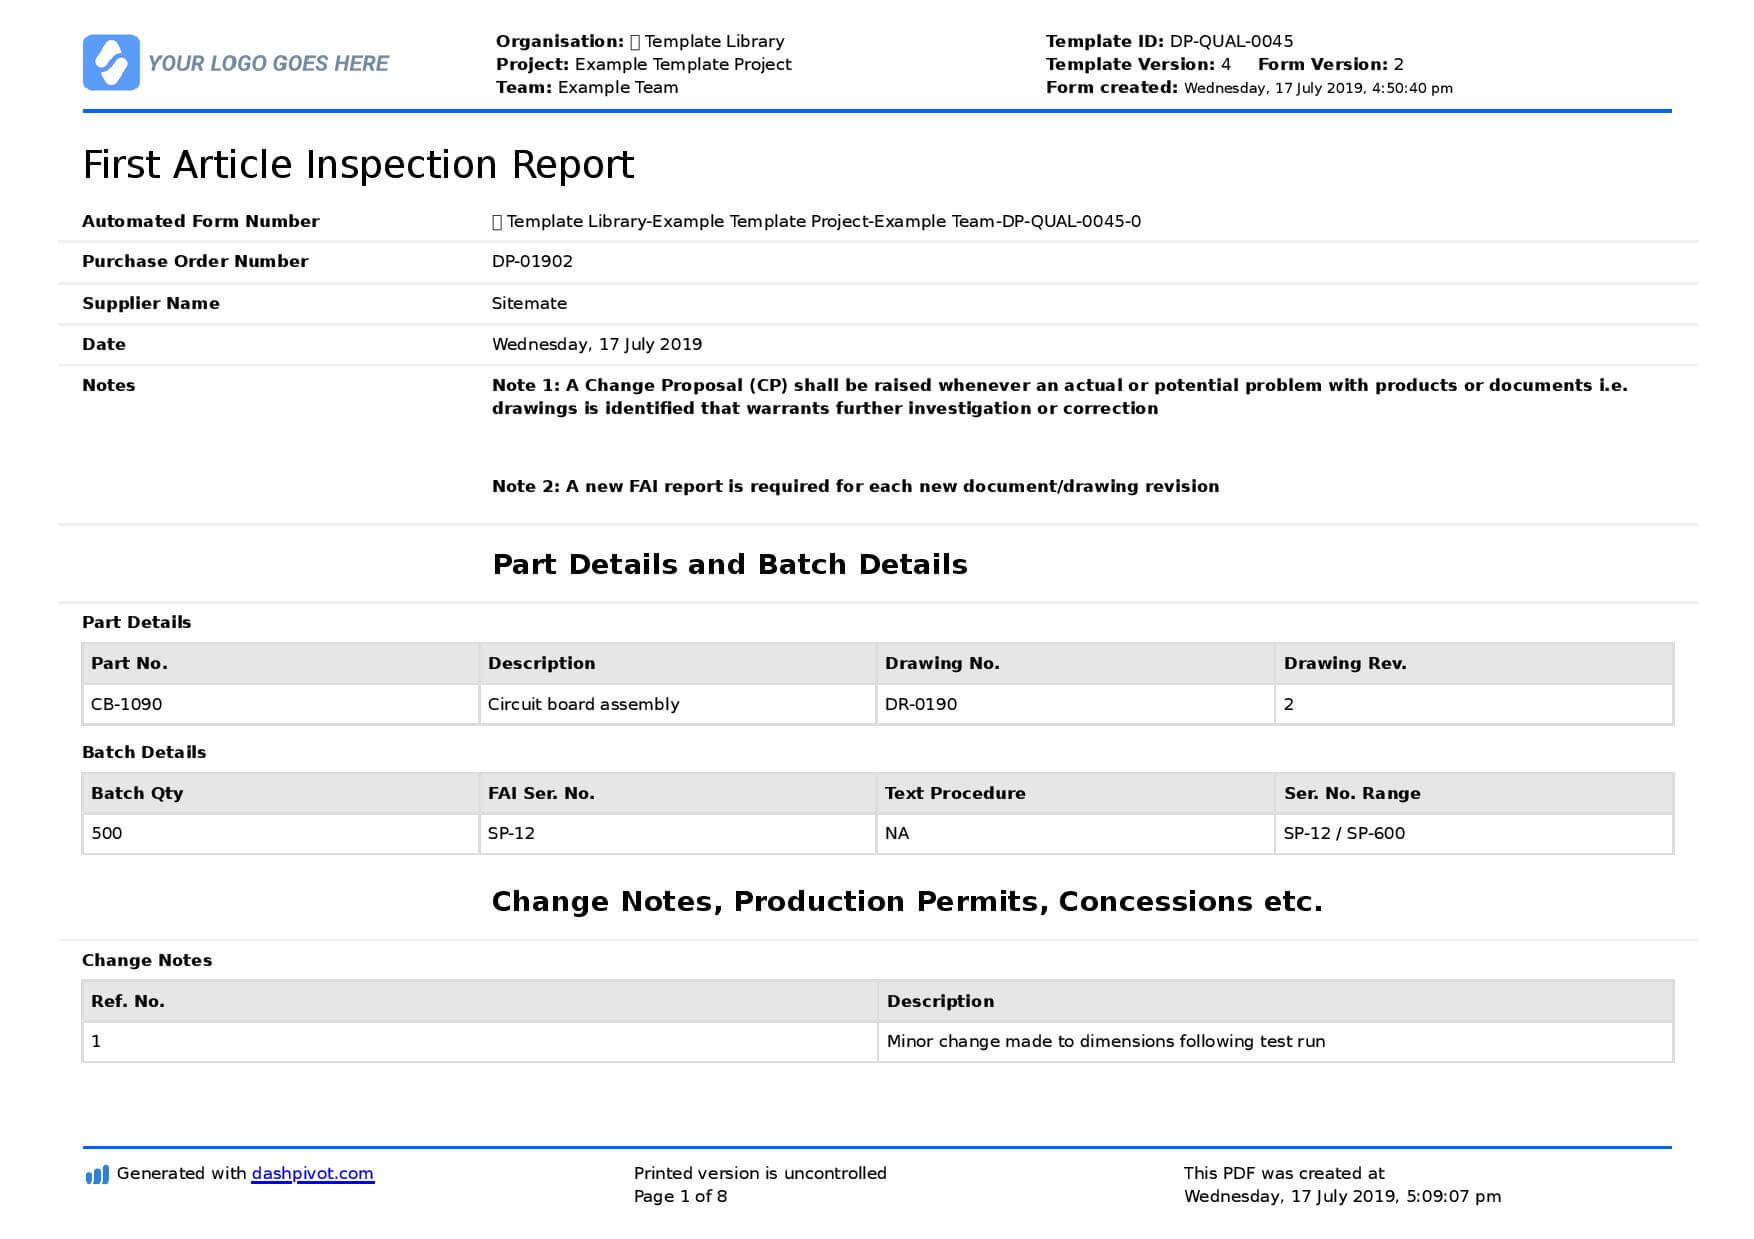 First Article Inspection Form Template: Free & Editable Throughout Engineering Inspection Report Template